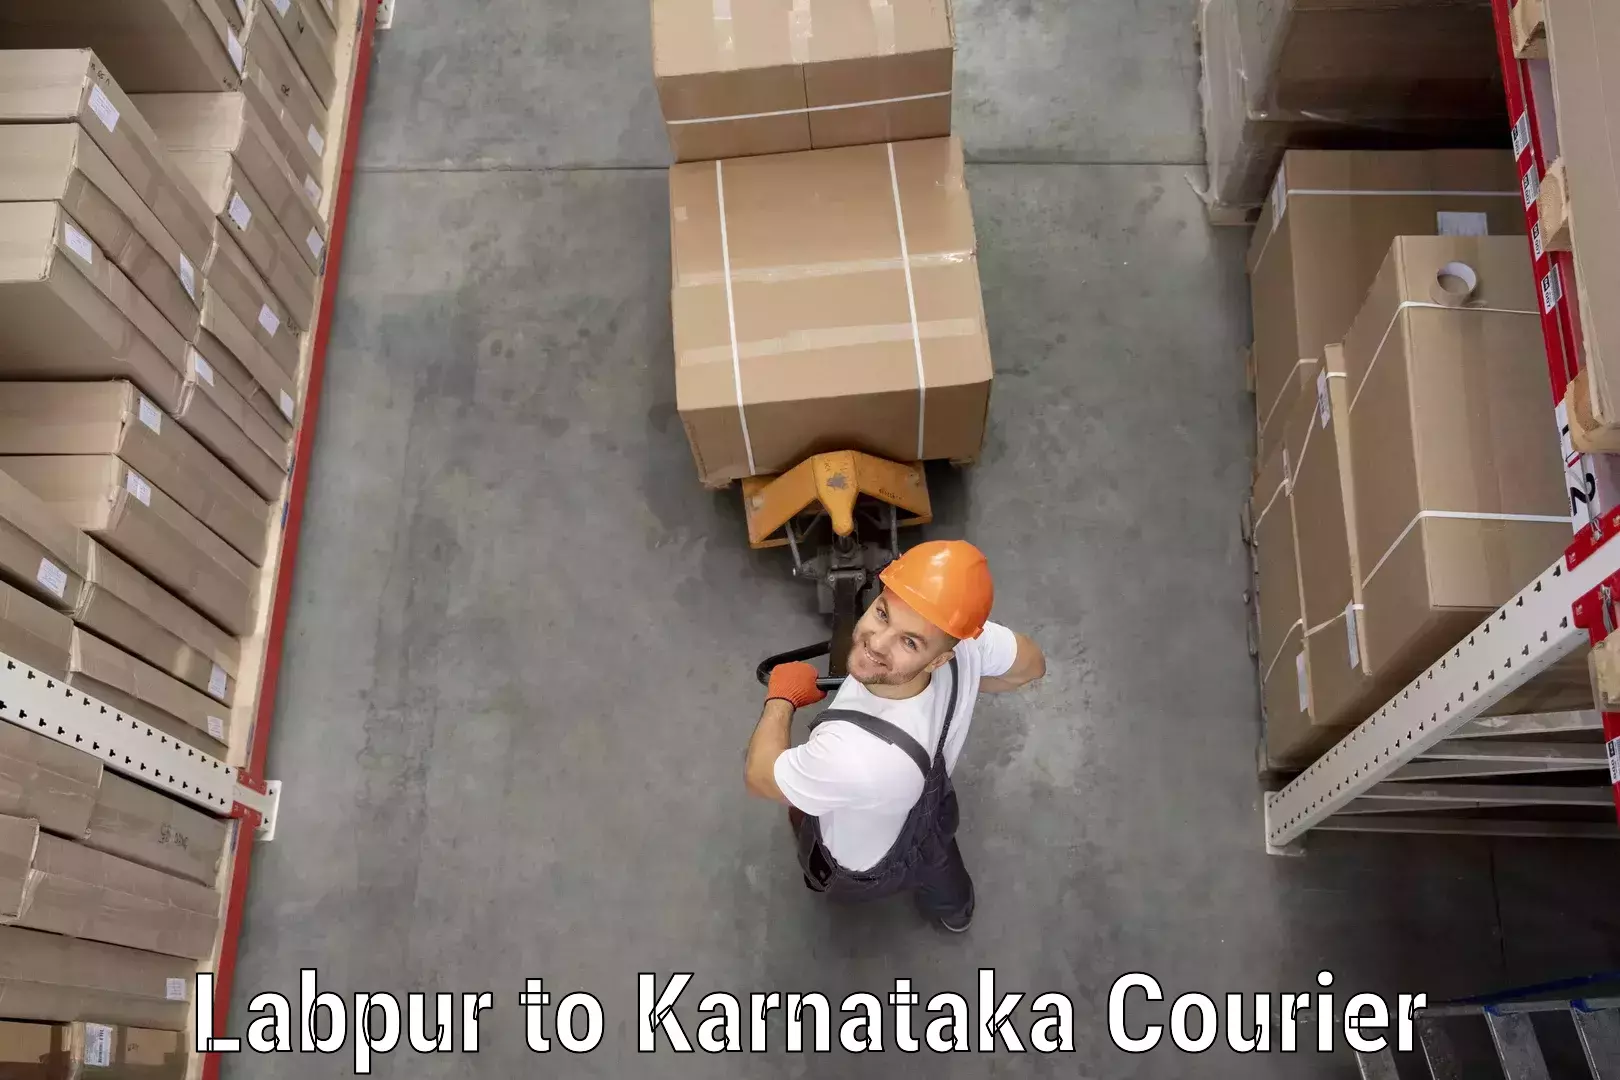 Cargo courier service Labpur to Dharwad